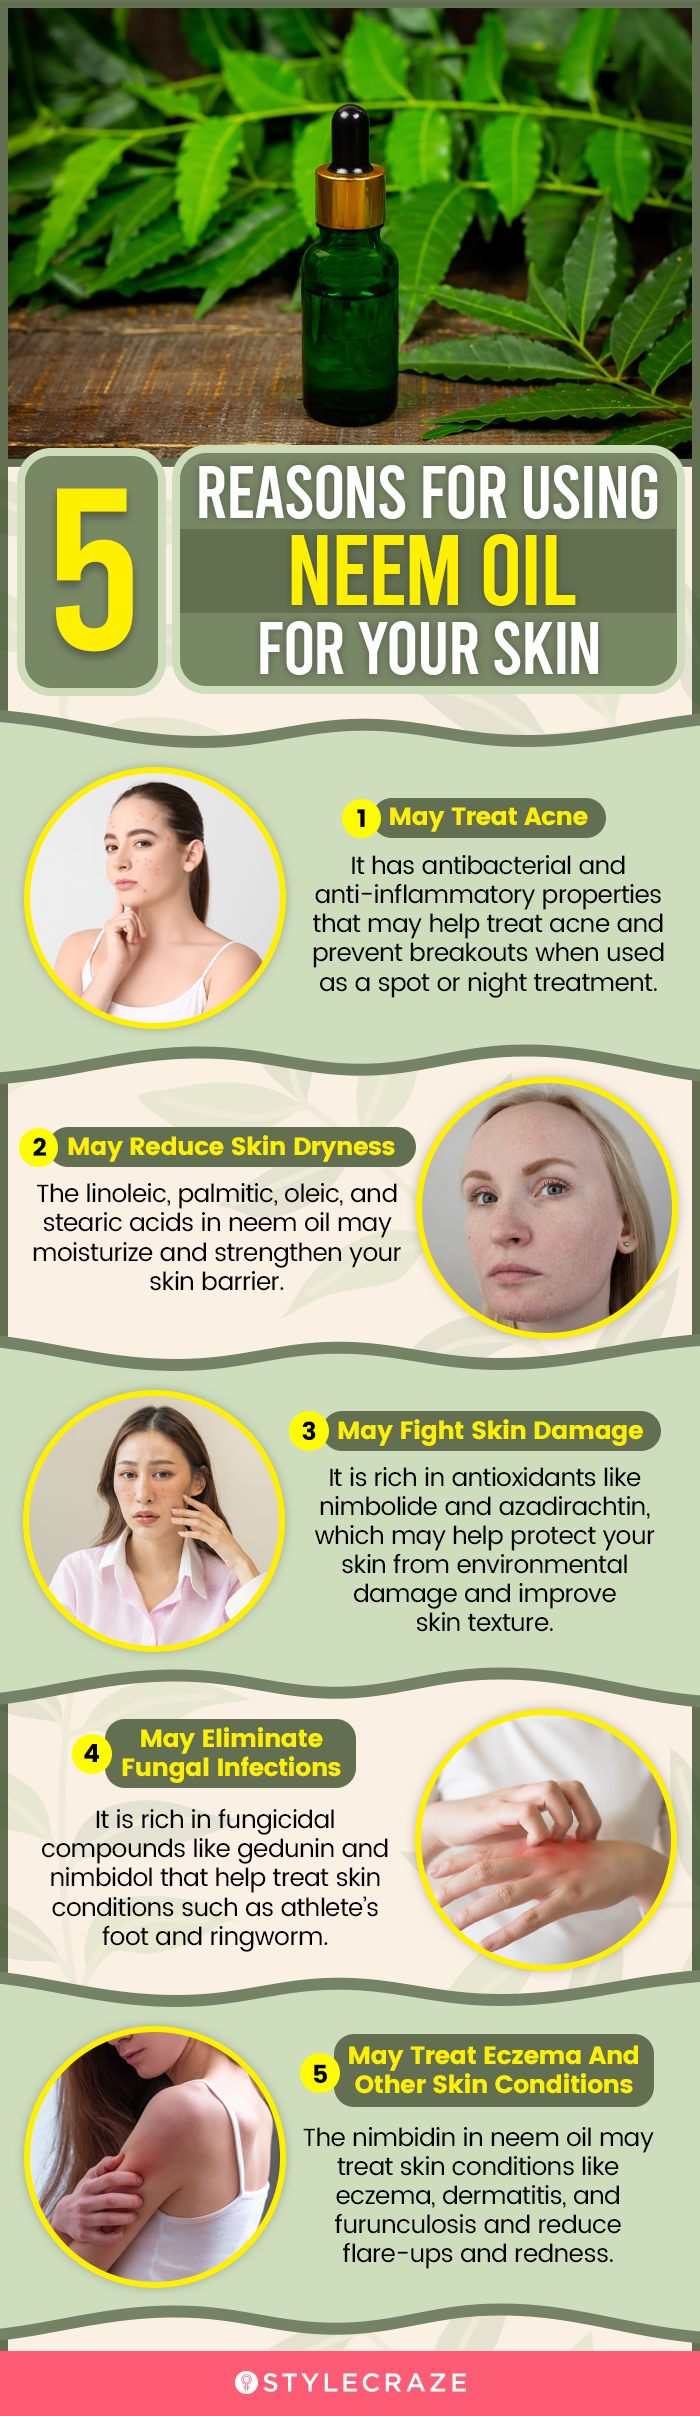 5 reasons for using neem oil for your skin (infographic)